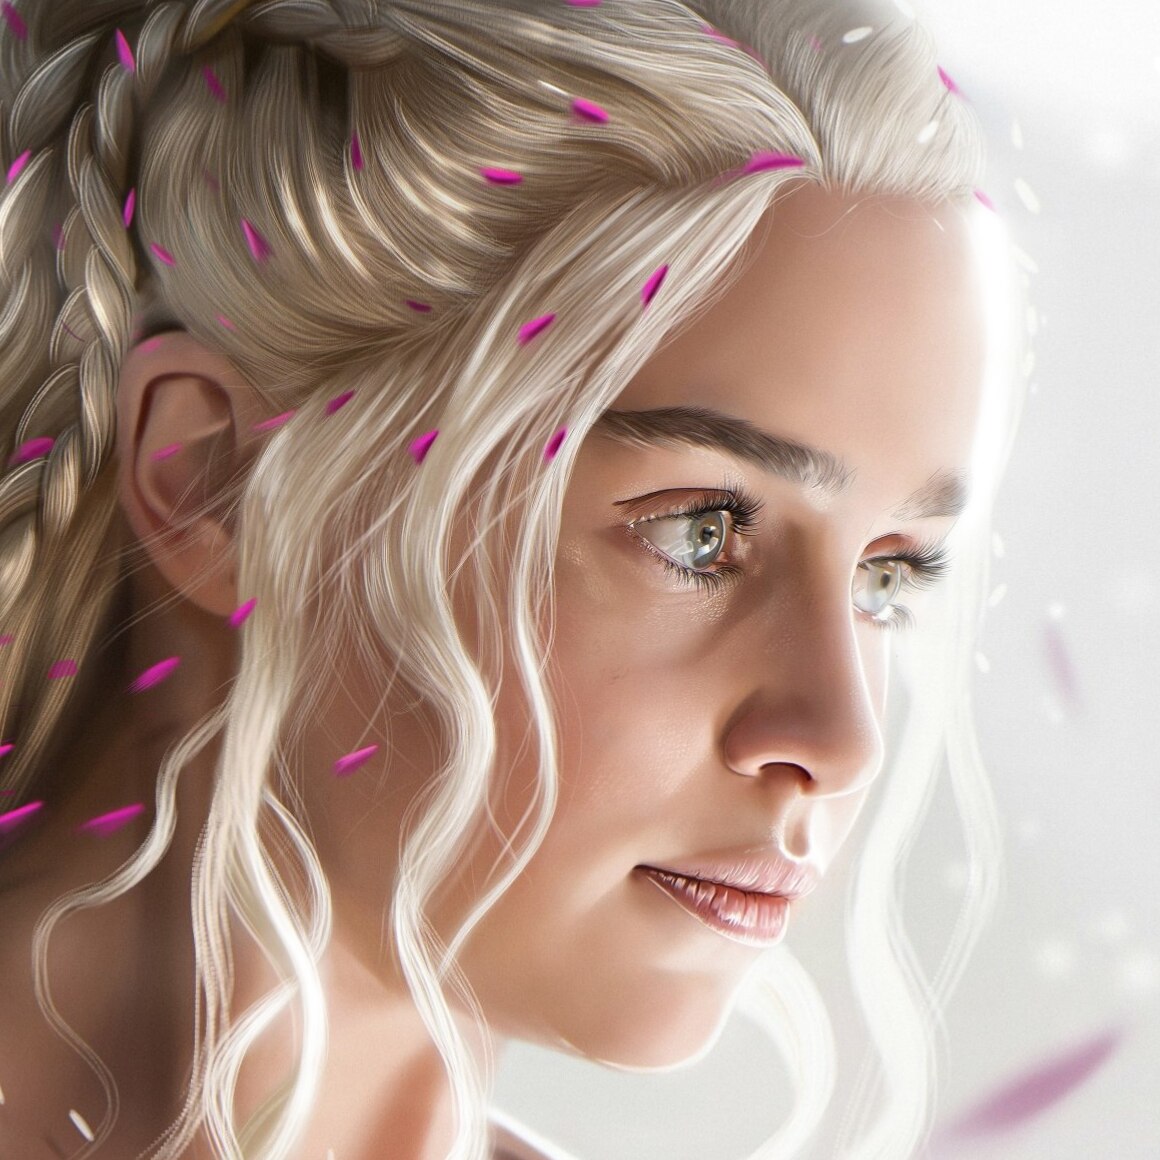 Game of Thrones - The Mother Of Dragons